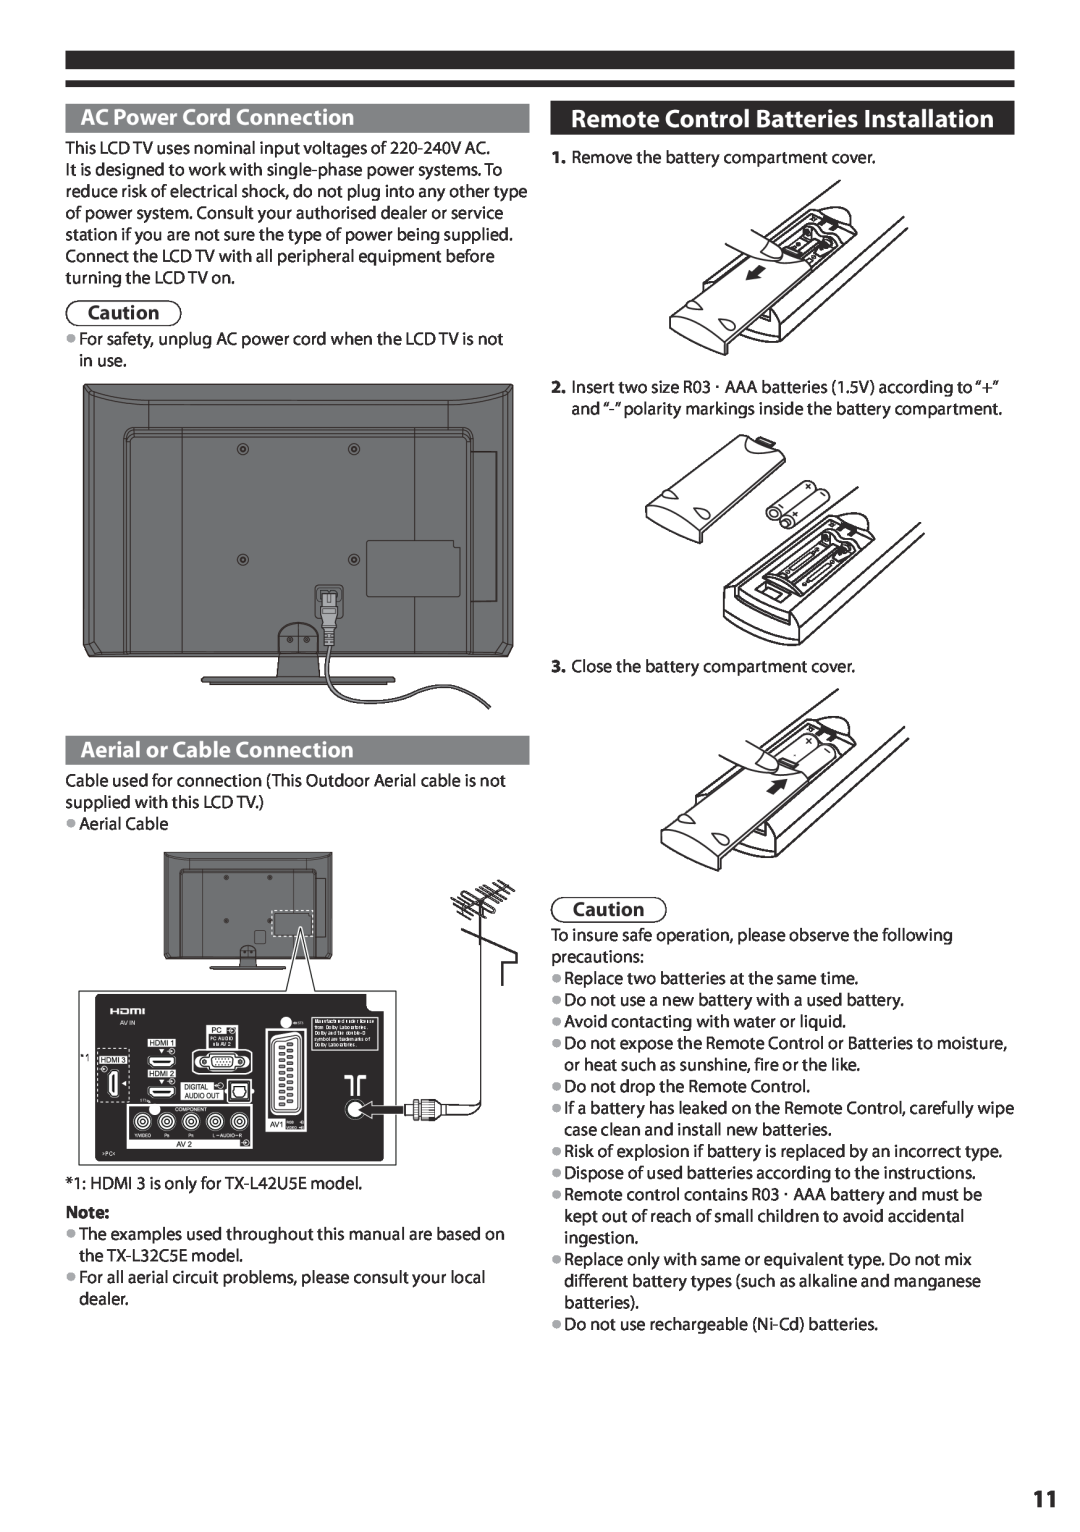 Panasonic TX-L32C5E, TX-L42U5E Remote Control Batteries Installation, AC Power Cord Connection, Aerial or Cable Connection 